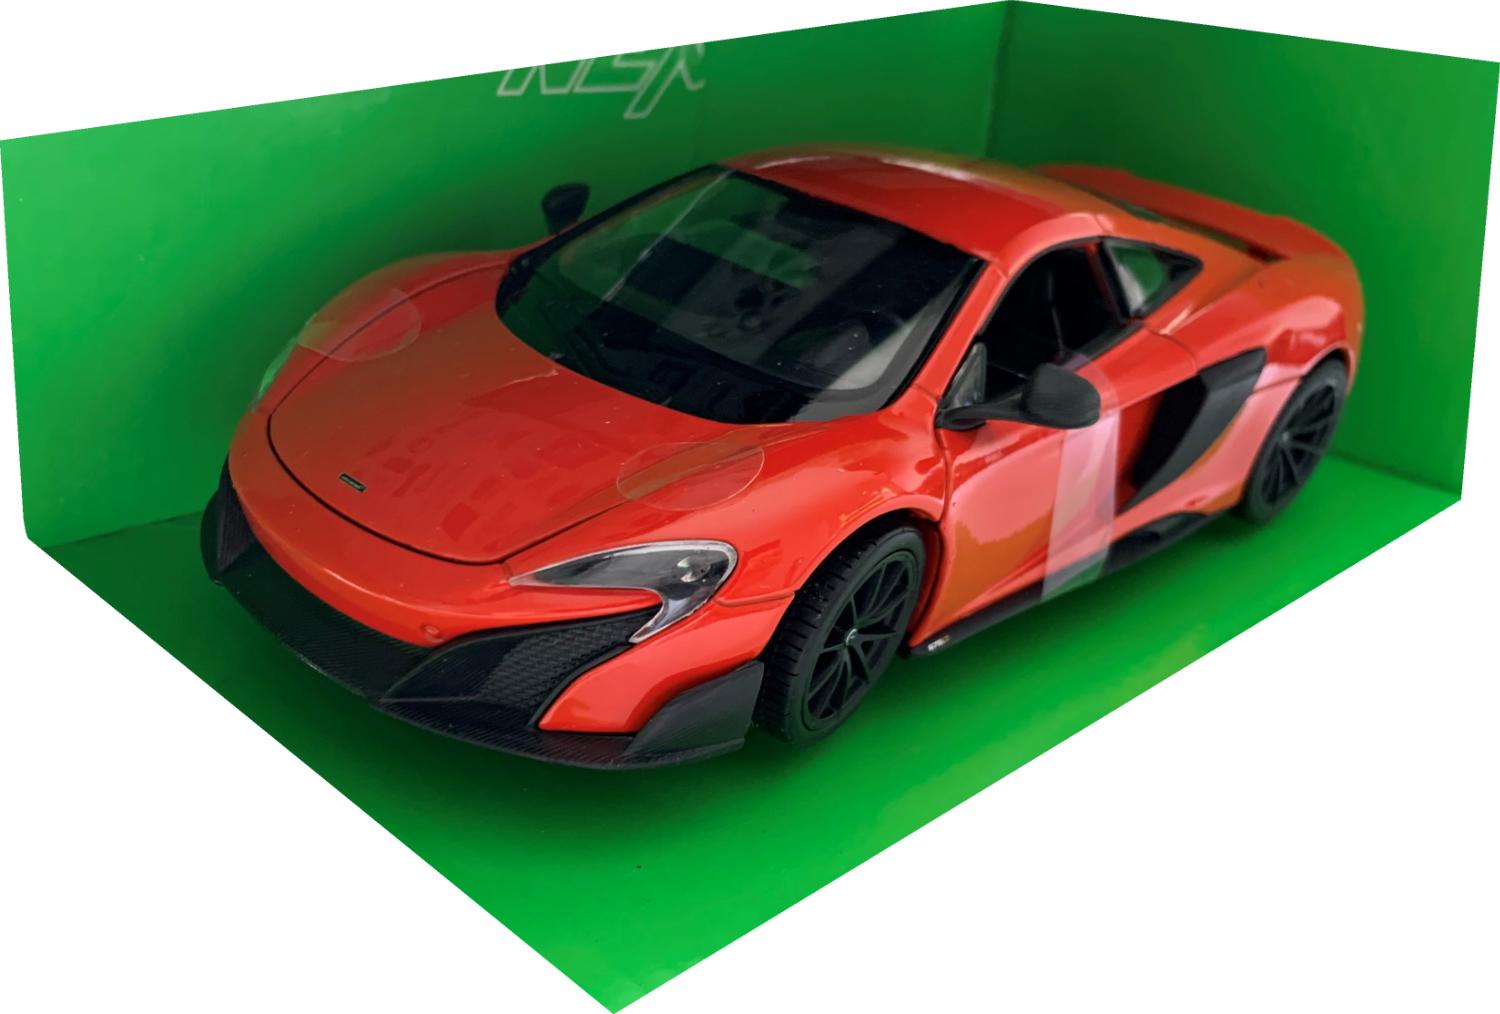 An excellent scale model of a McLaren 675LT Coupe decorated in red with  rear spoiler, side vents and black wheels.